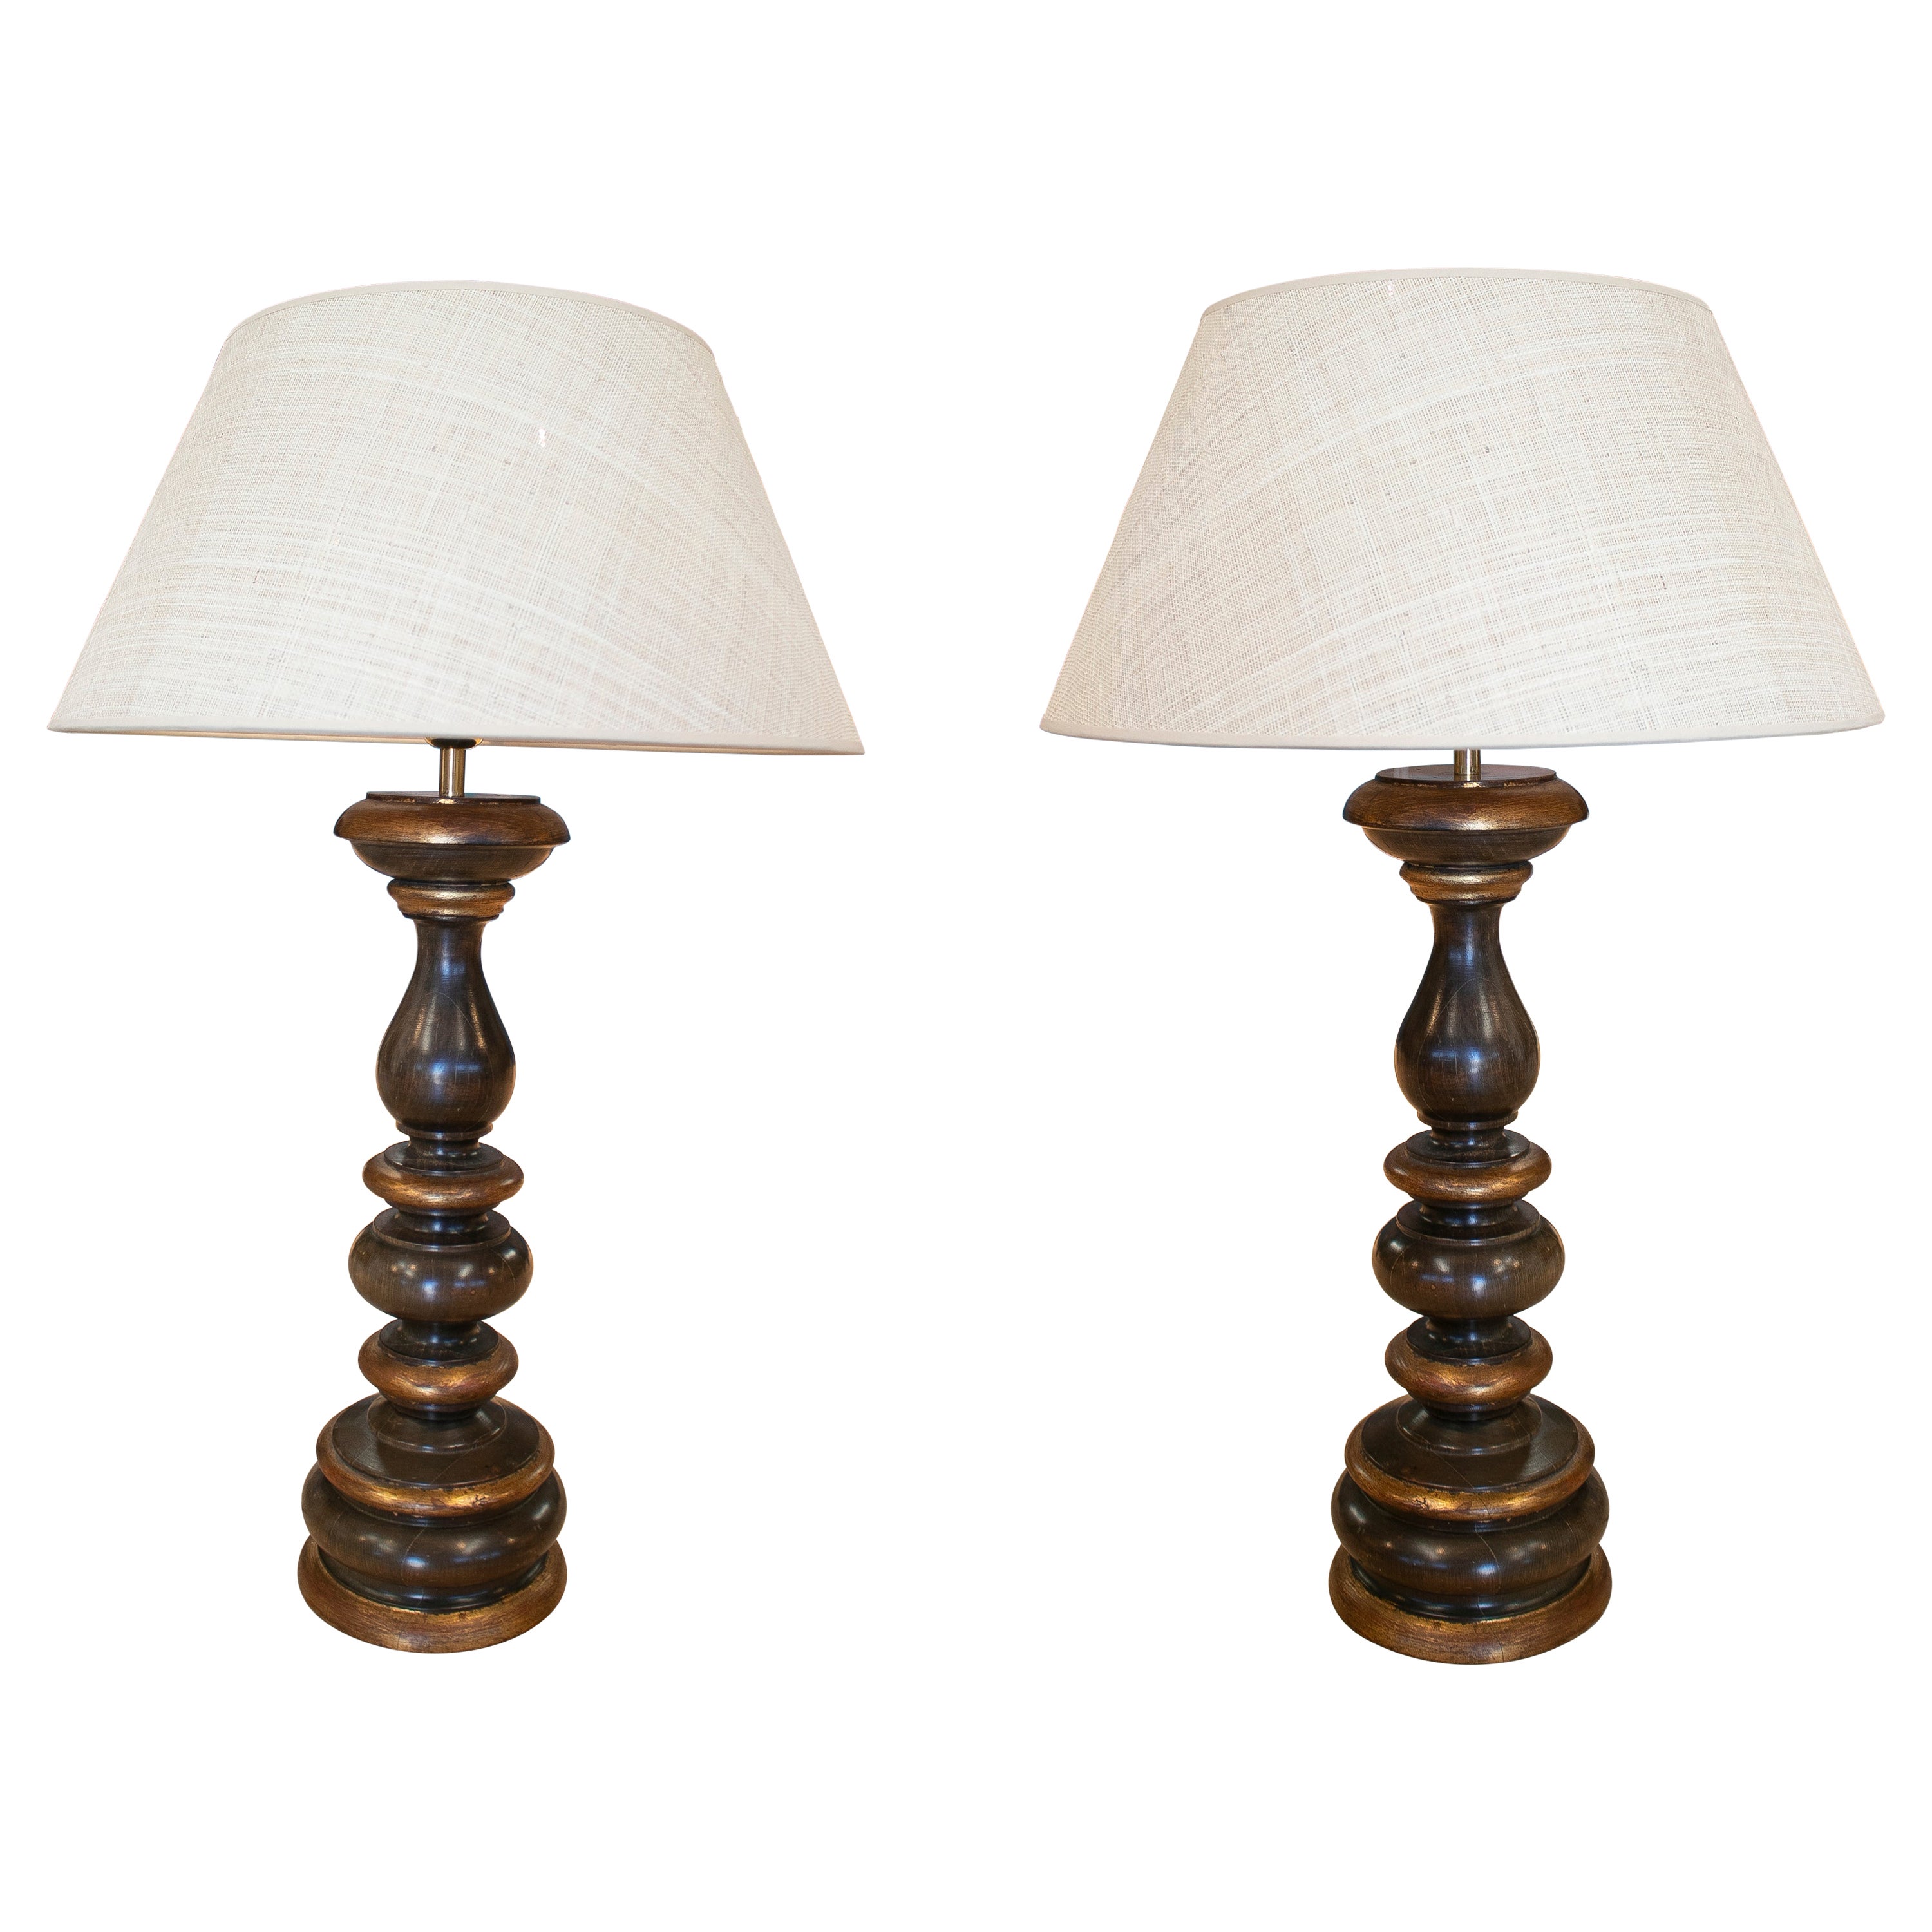 Pair of 1990s Spanish Wooden Spindle Table Lamps